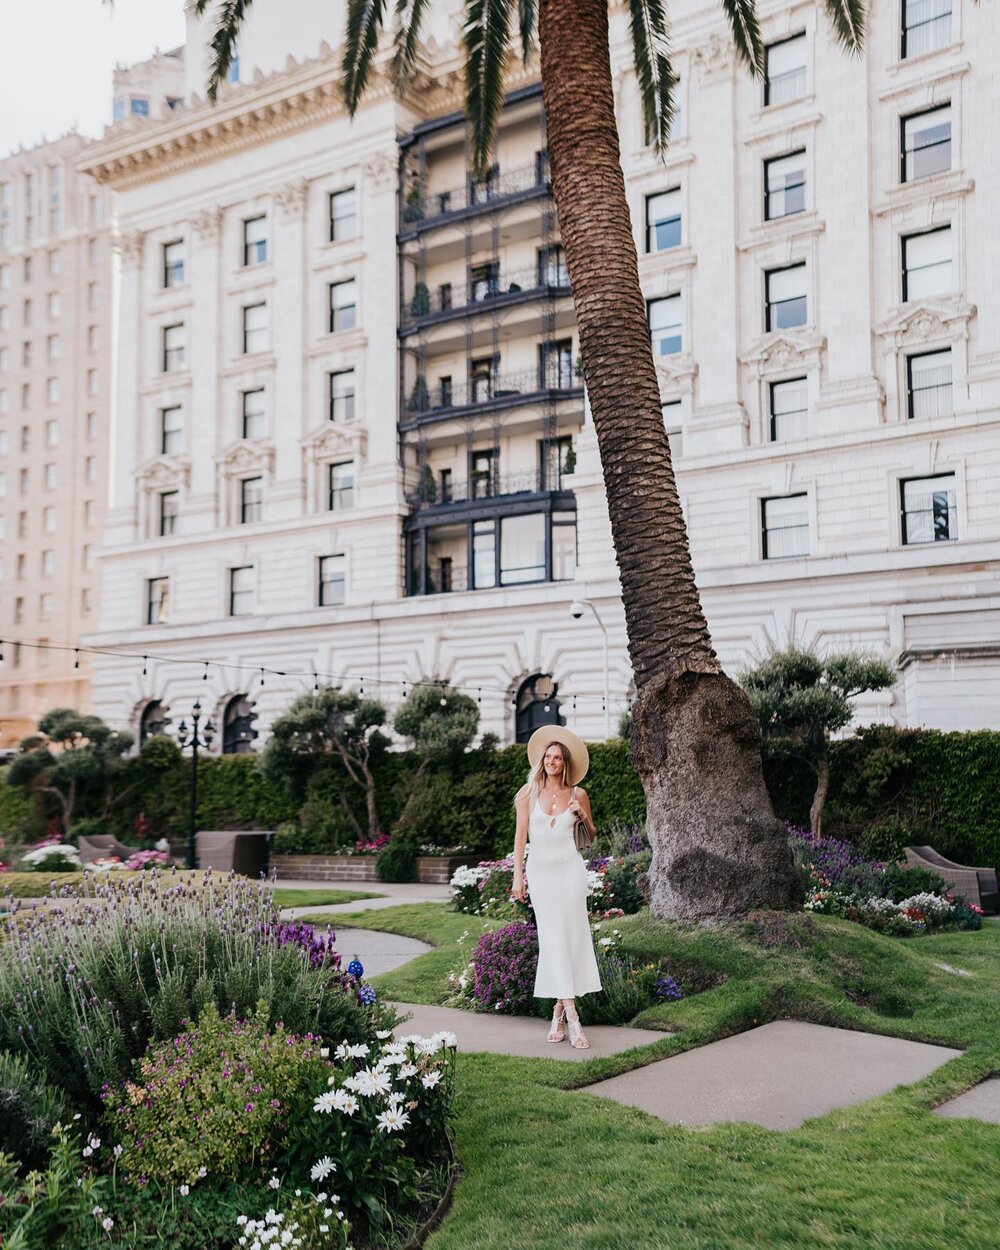 Step into the lap of luxury at the iconic @fairmontsanfrancisco ✨ This hotel is a true gem, with its rich history and regal charm that will leave you feeling like royalty.

From the moment we checked in, we were treated to the VIP treatment. We even 